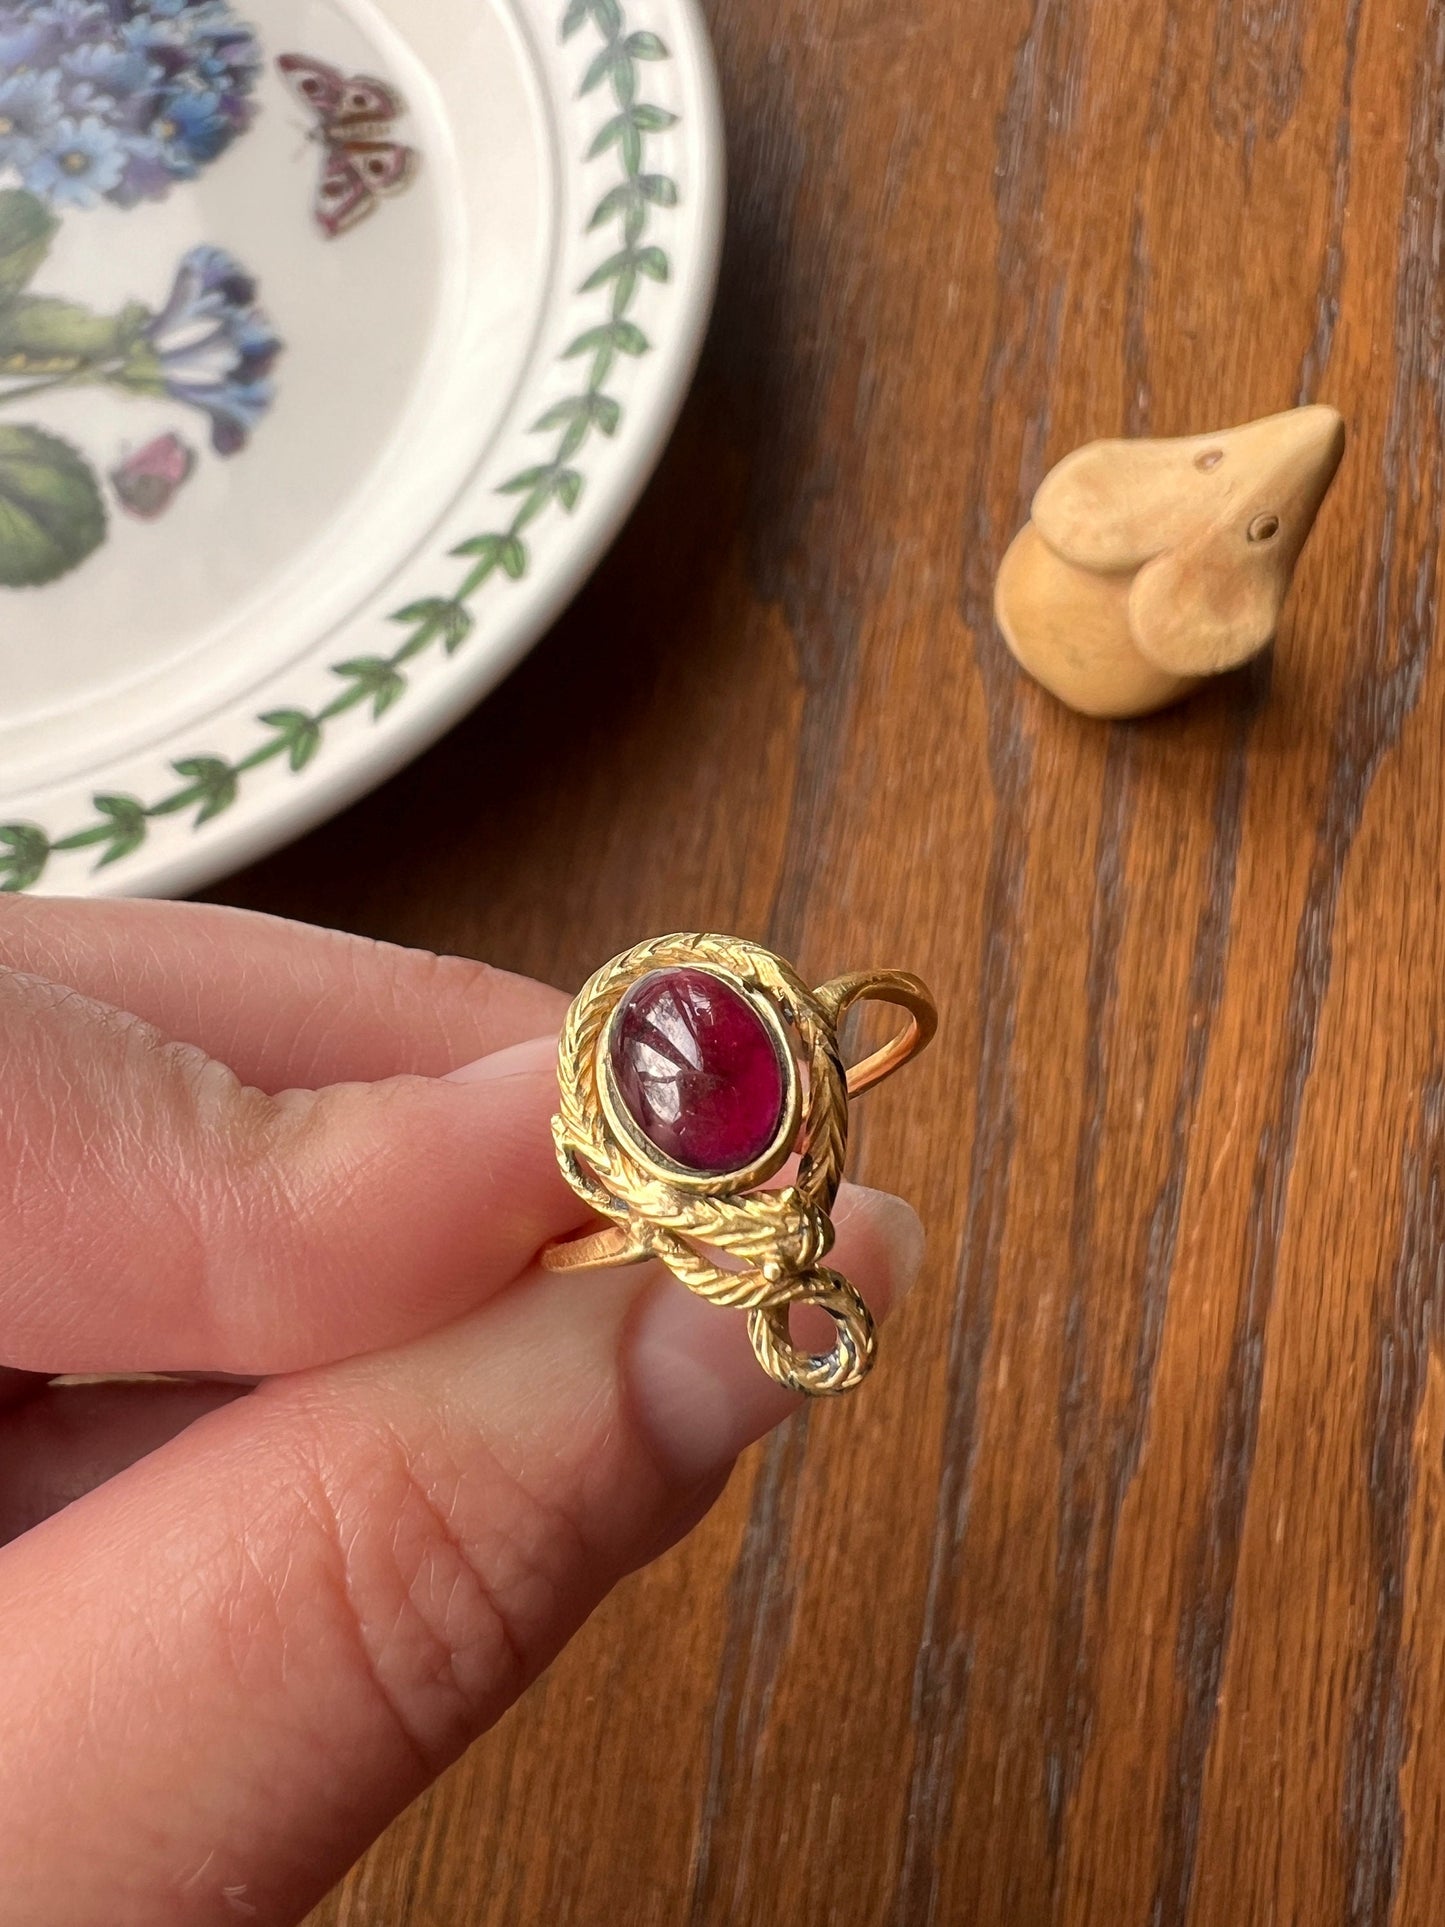 SNAKE Coiled Cabochon GARNET Ring 14k Figural 18k Gold Shank Juicy Glow Purple Victorian Stacker Eternal Love Romantic Gift Engraved Scales